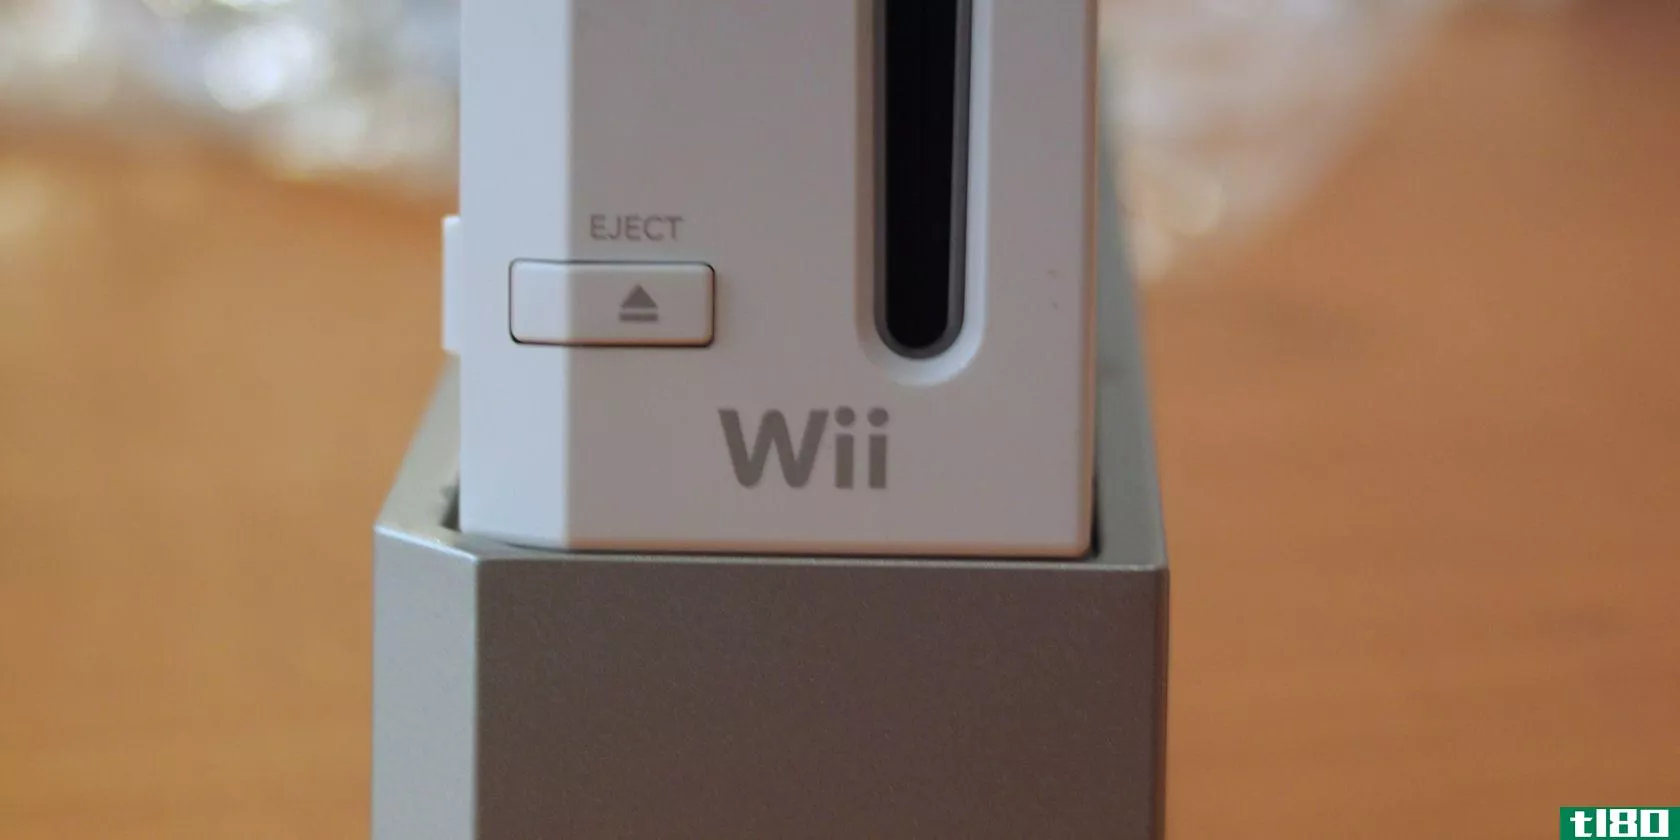 nintendo-wii-troubleshoot-connect-to-the-internet-featured